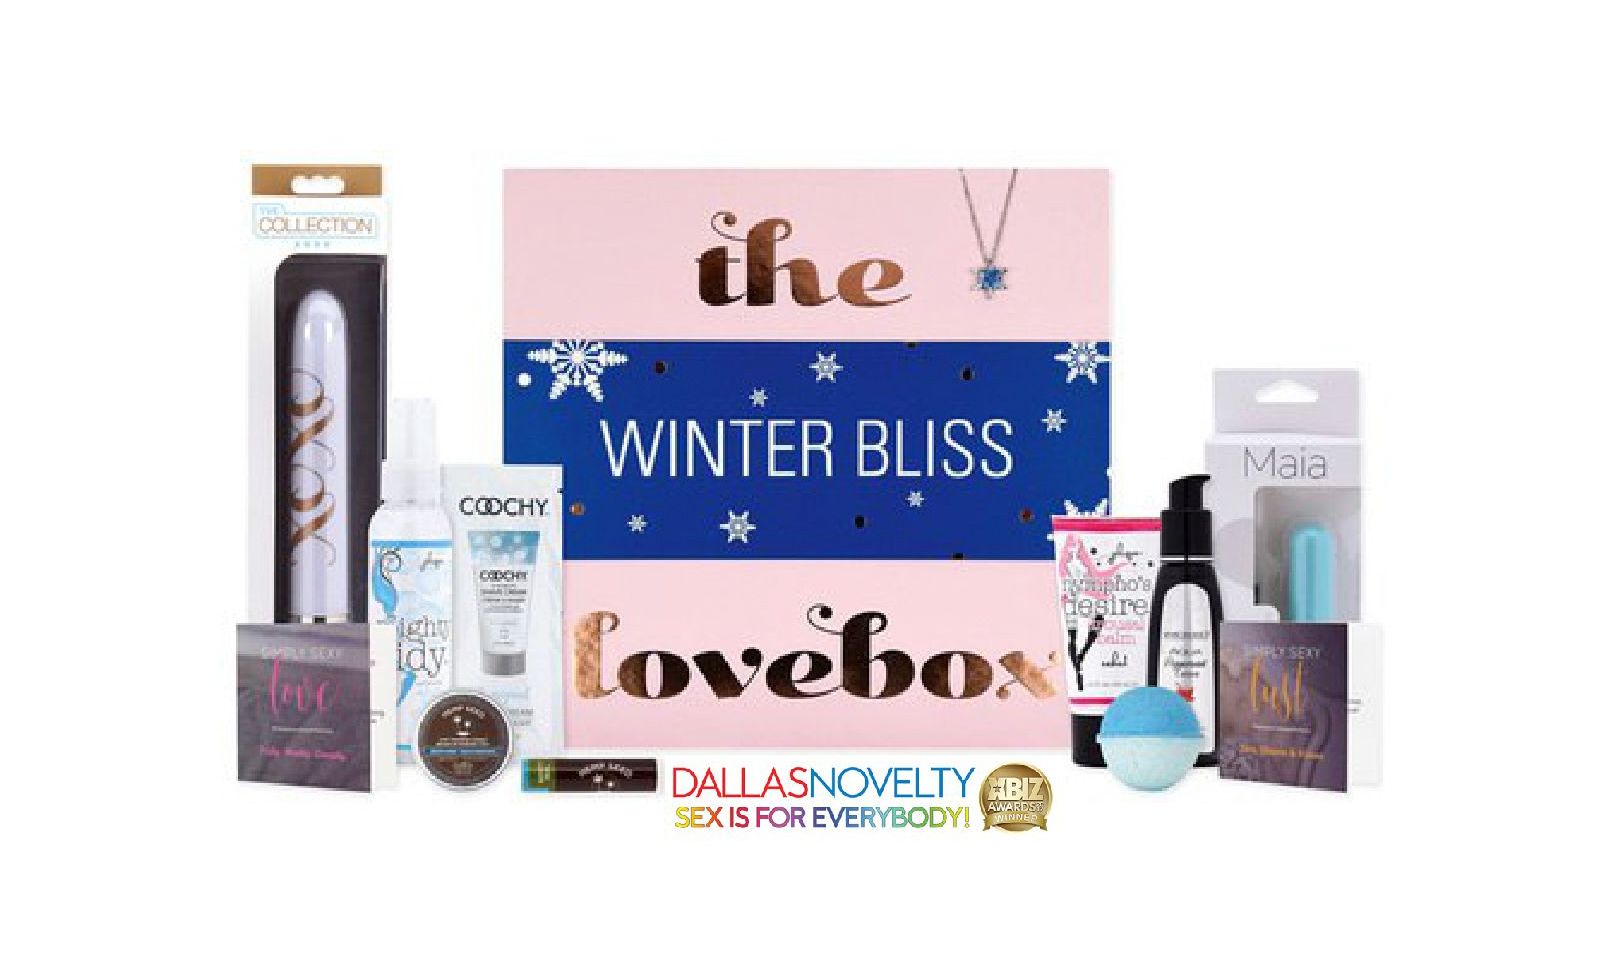 Dallas Novelty Carrying Holiday Products’ Winter Bliss LoveBox